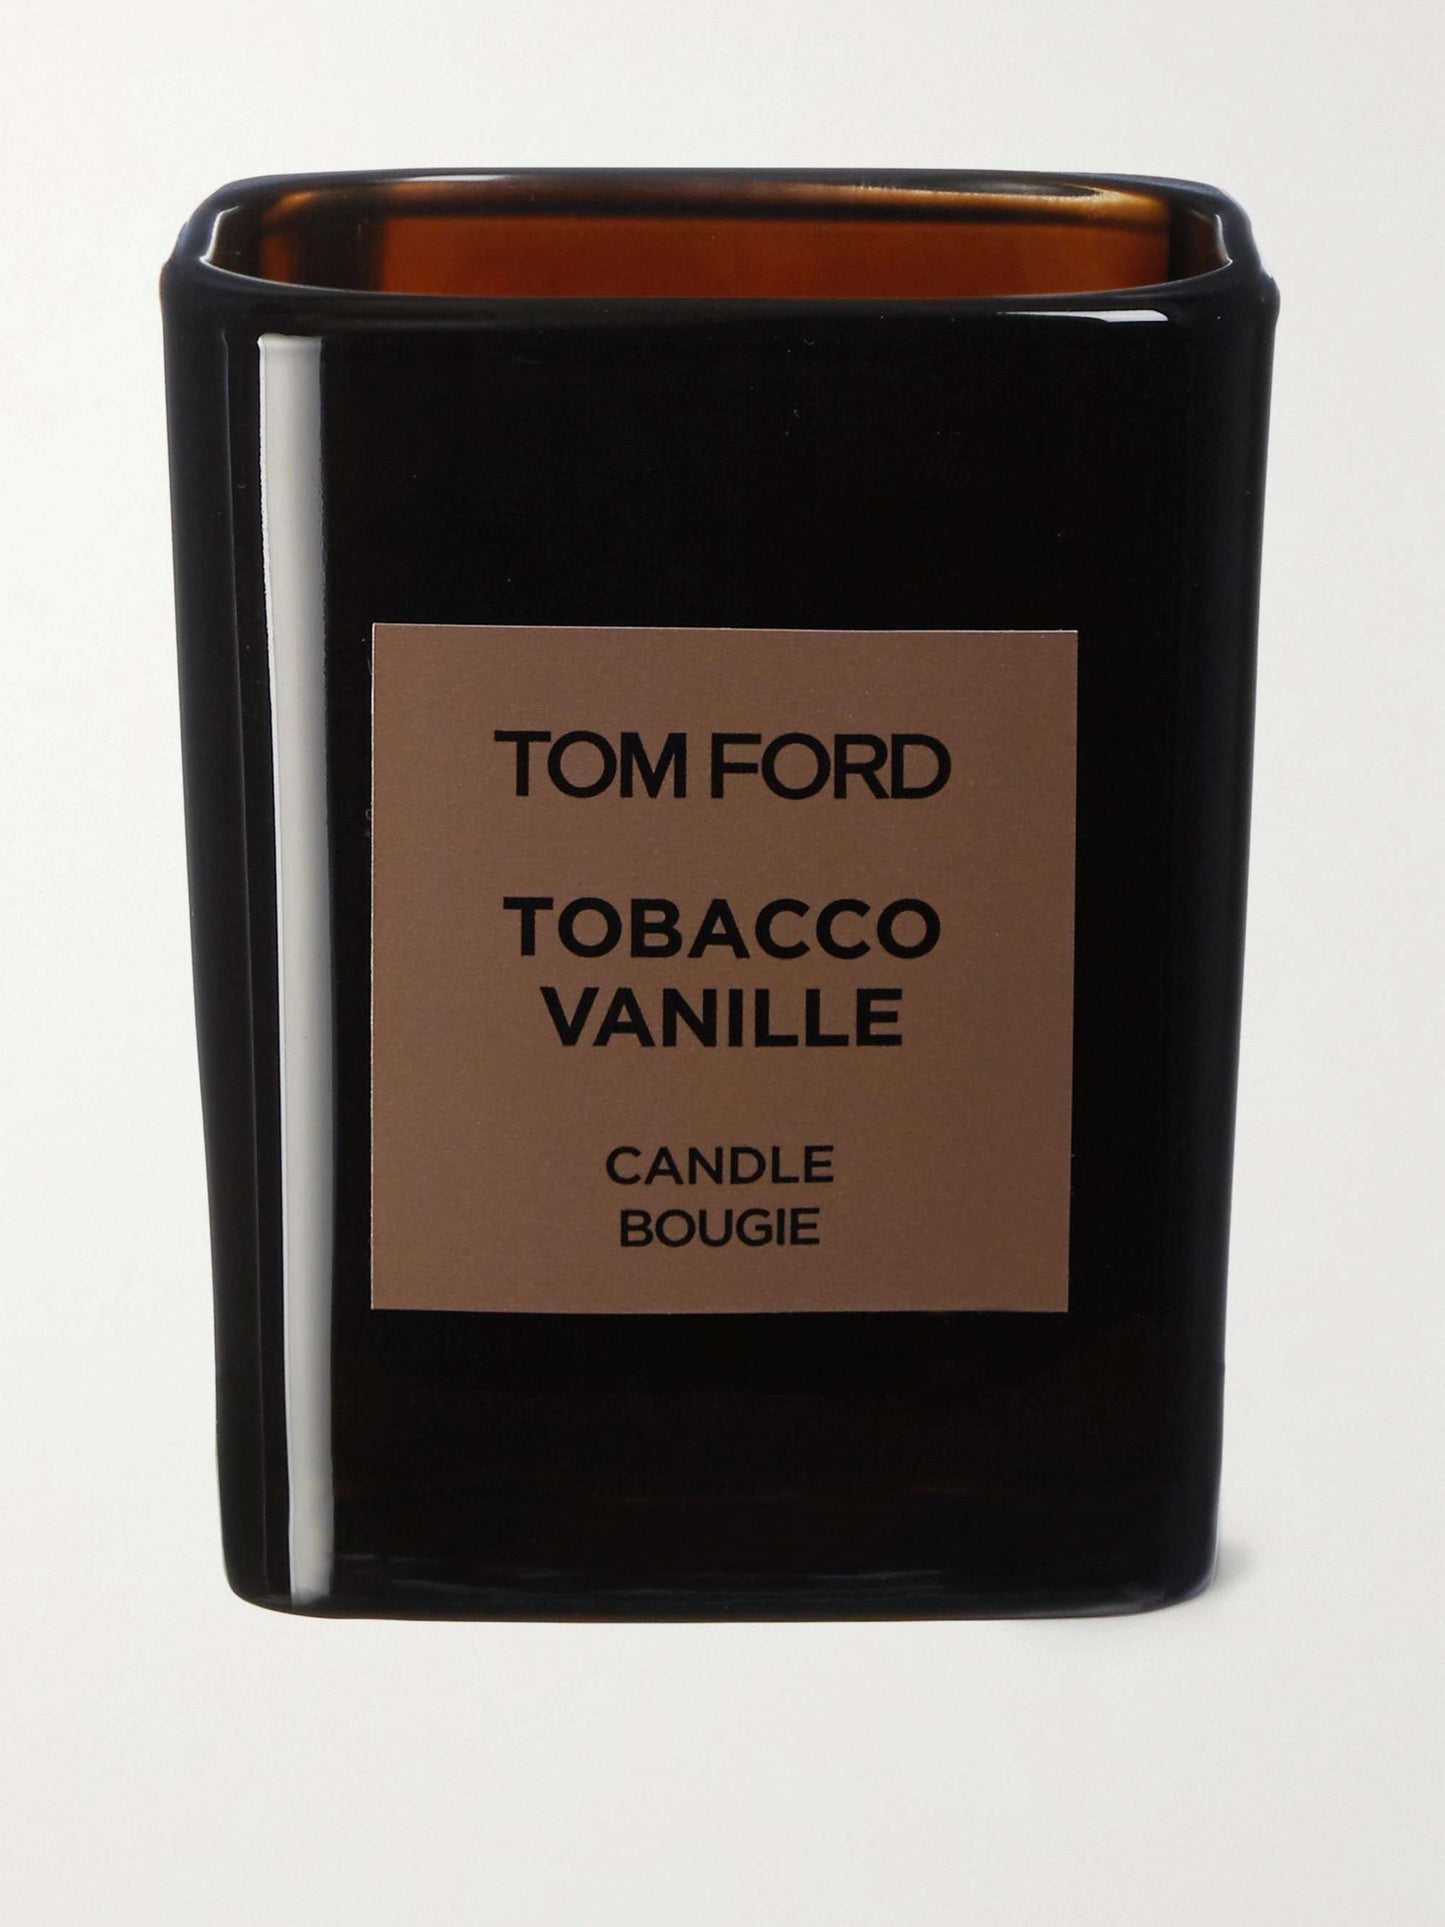 TOM FORD Tobacco Vanille Candle